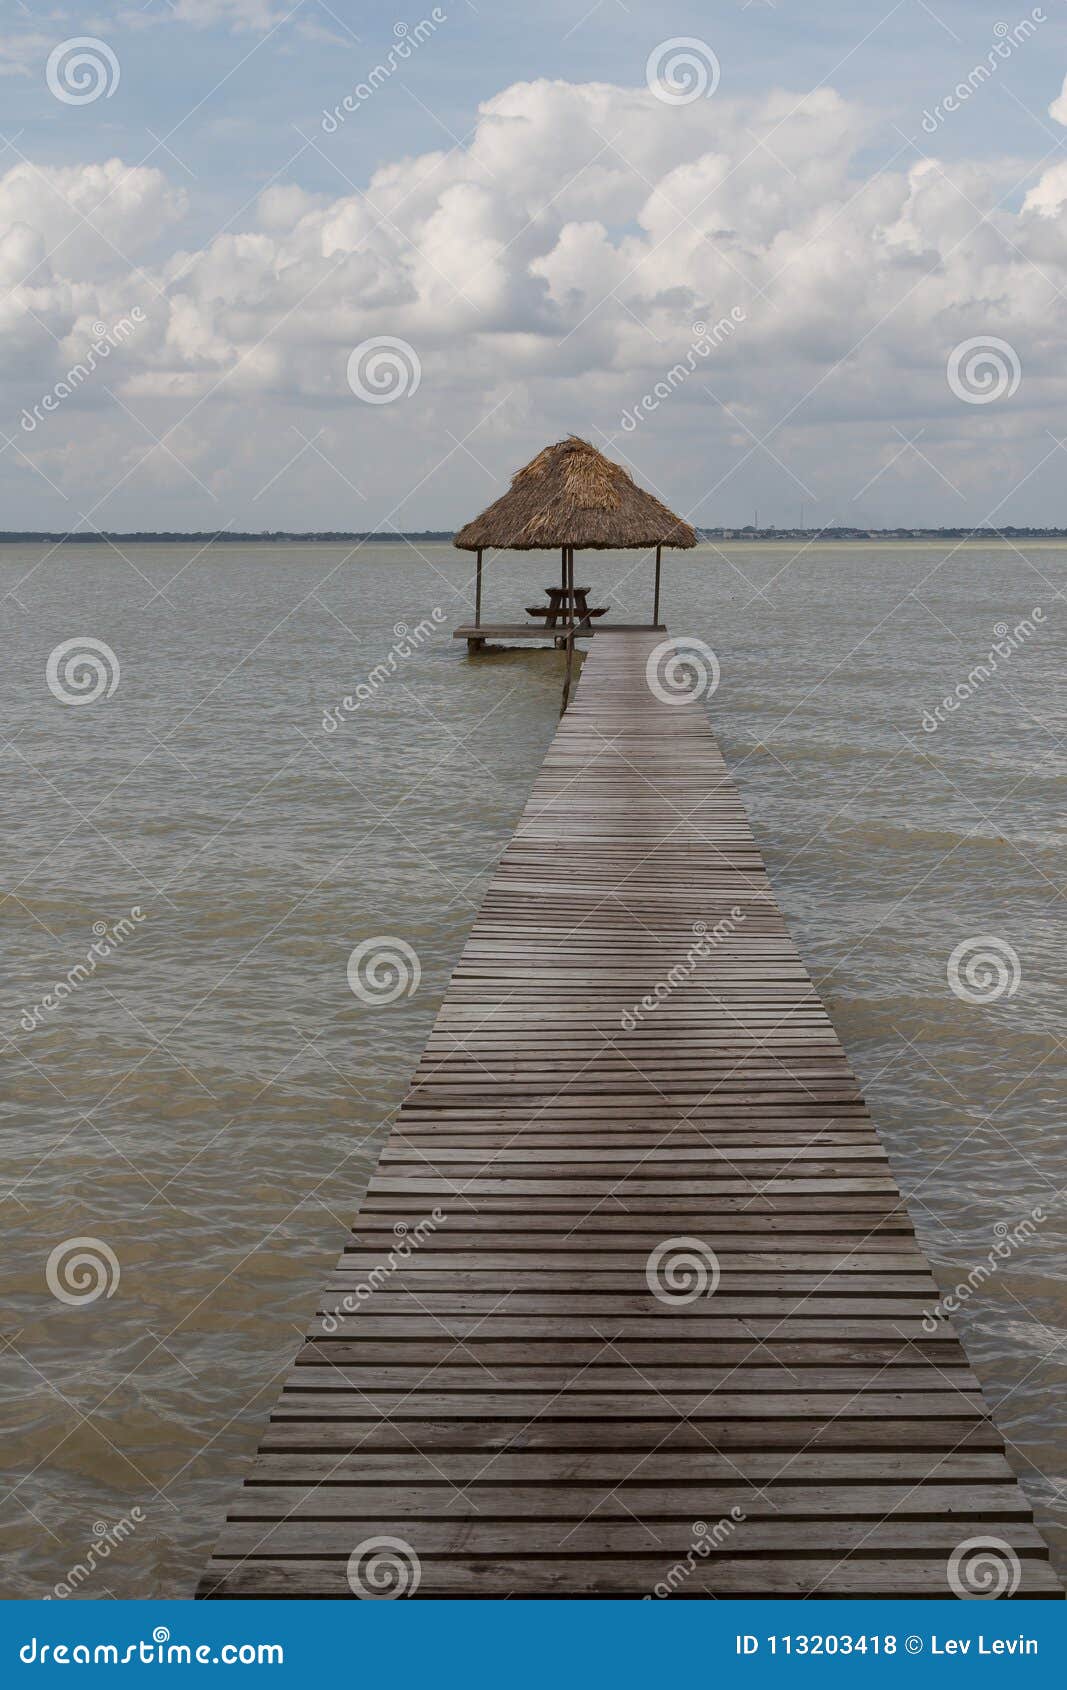 pier near ruins of the ancient mayan archaeological site cerros